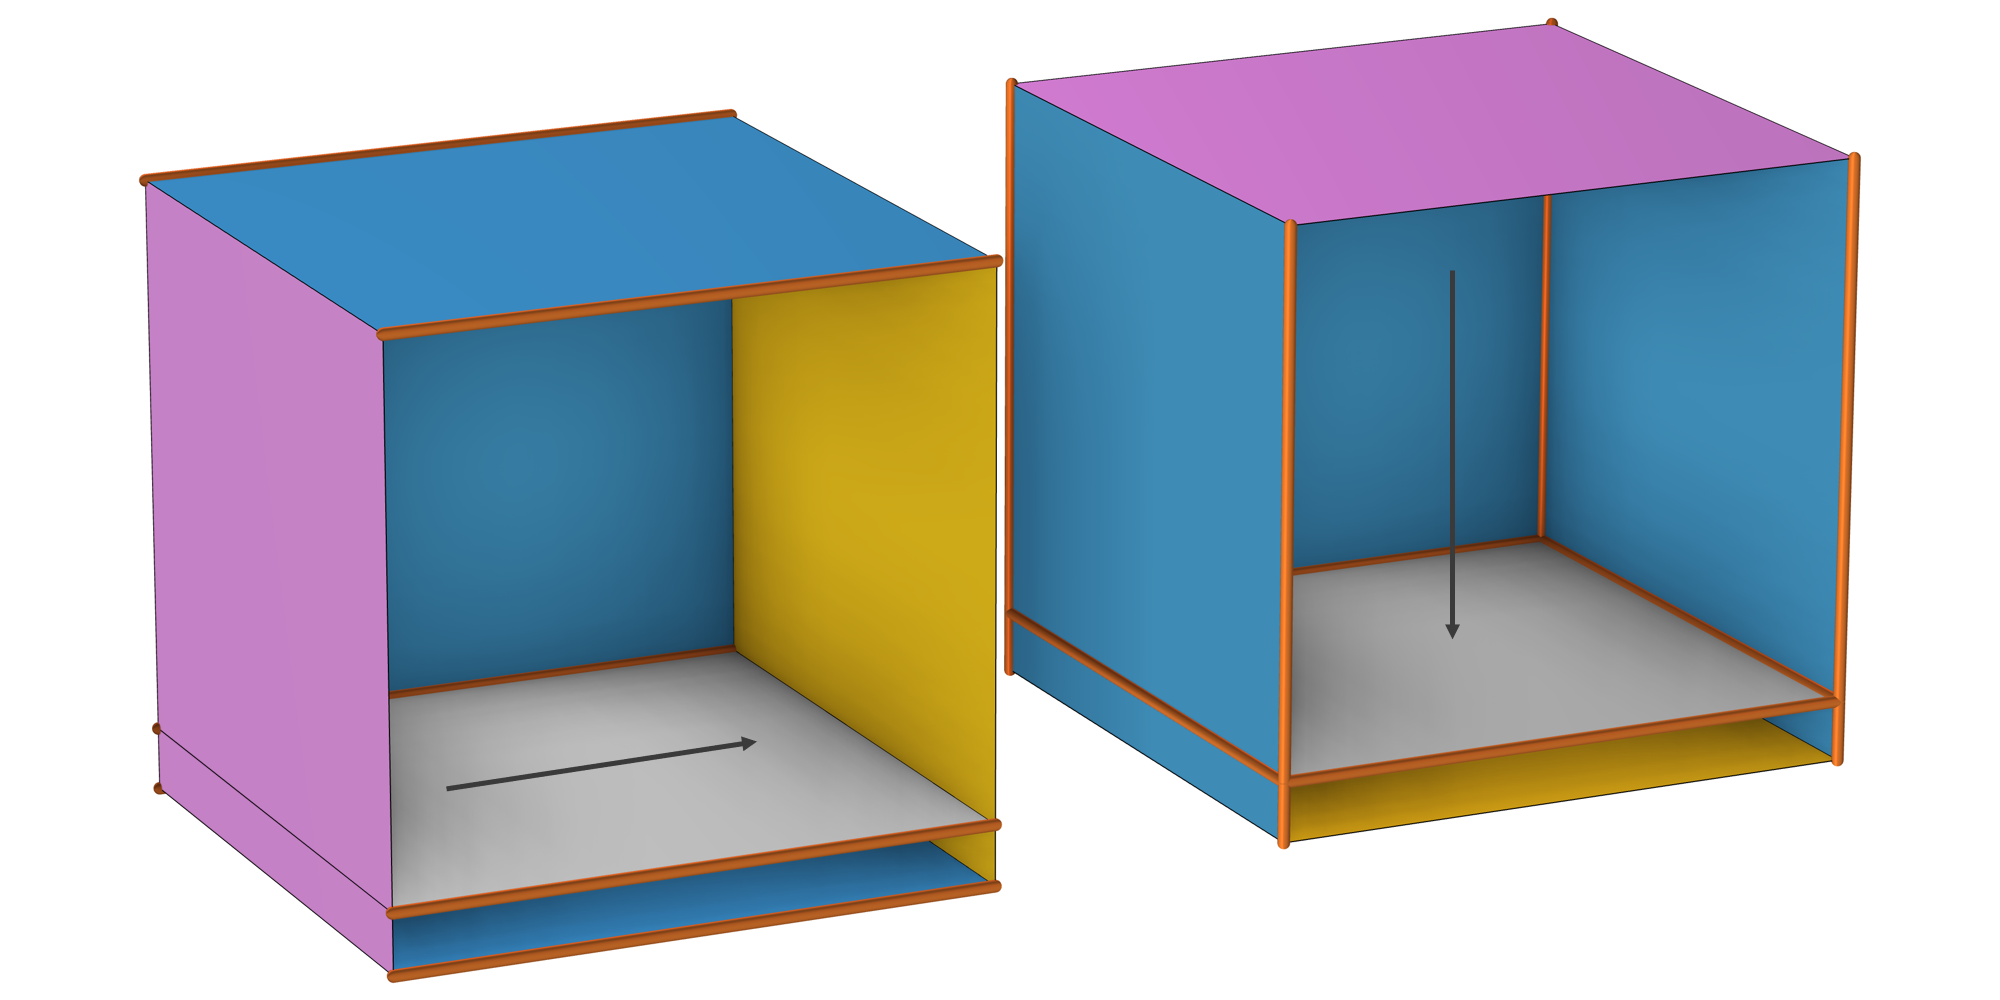 Two images of a block geometry with two arrows pointing in the different possible directions that a Swept mesh operation can take.